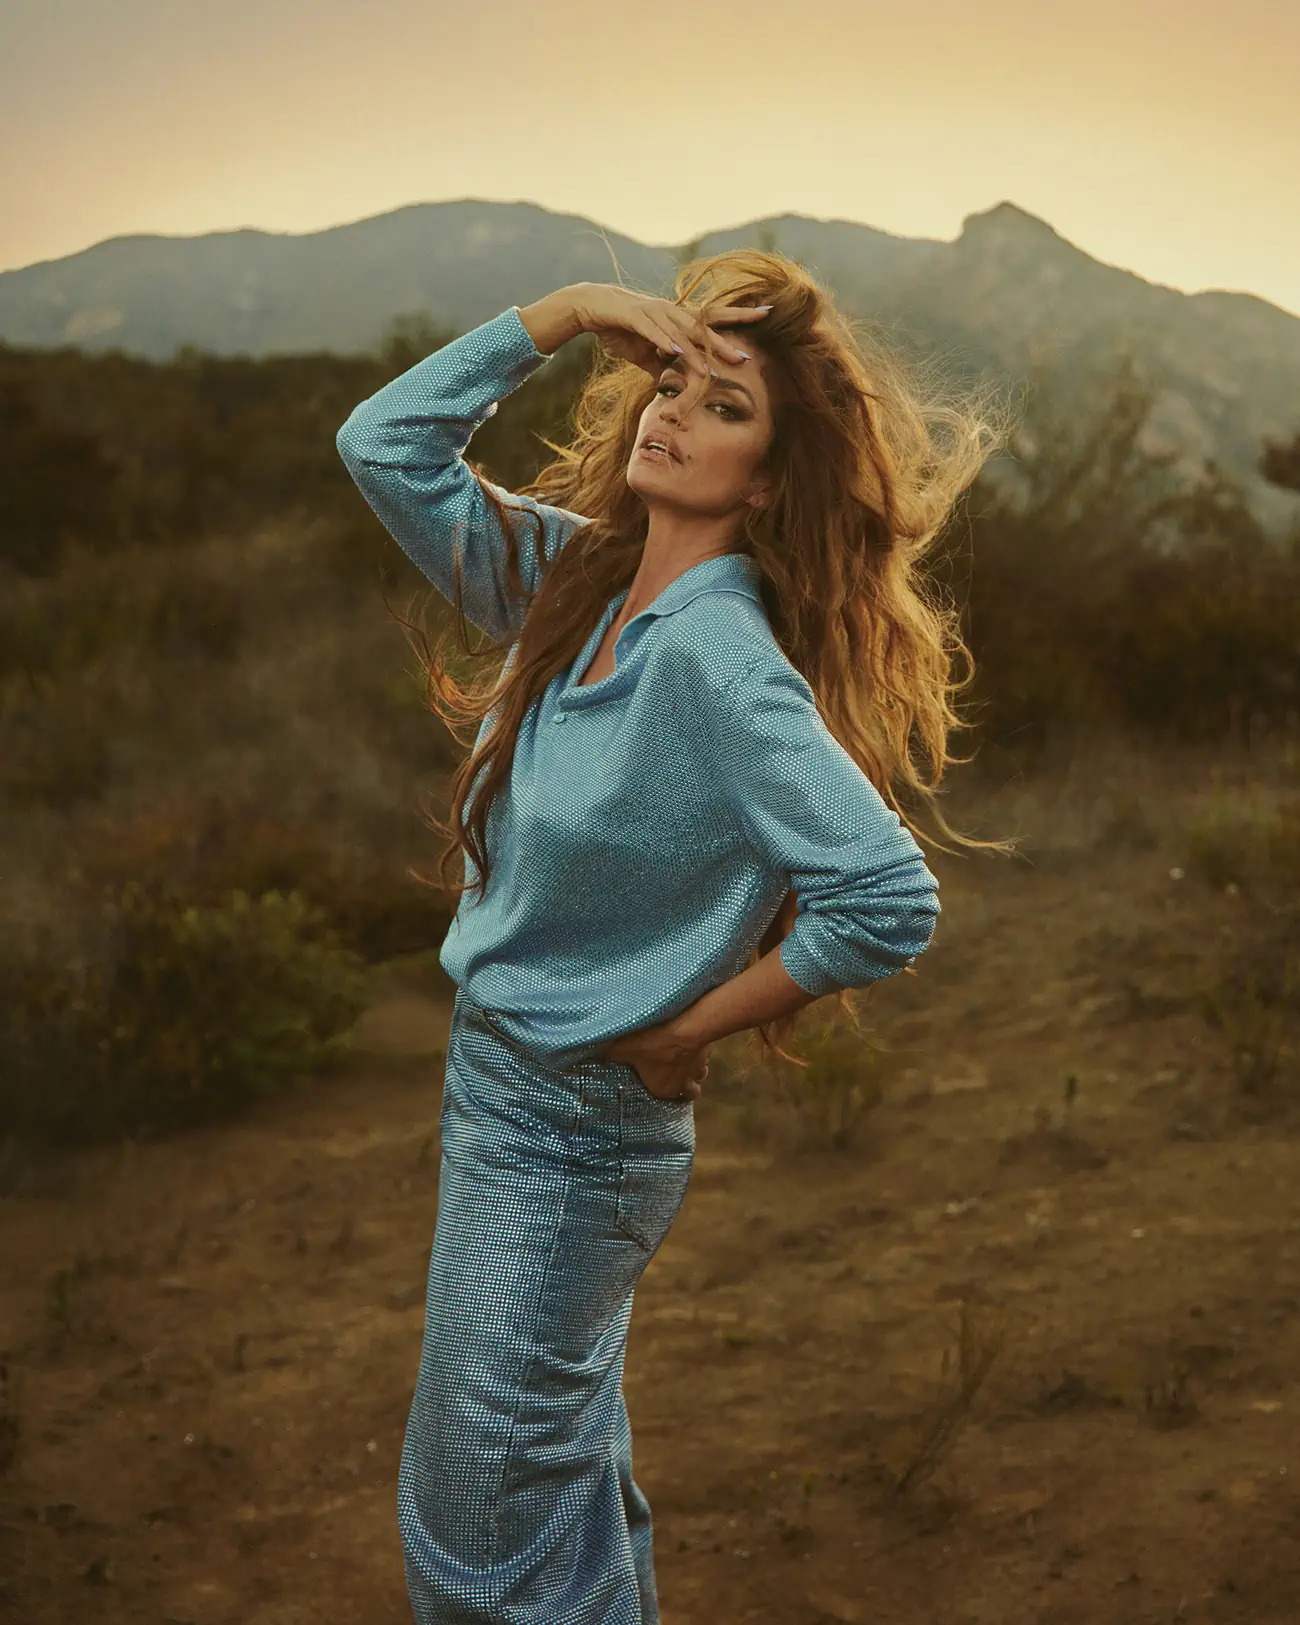 Cindy Crawford covers Flaunt Magazine Issue 190 by Greg Swales